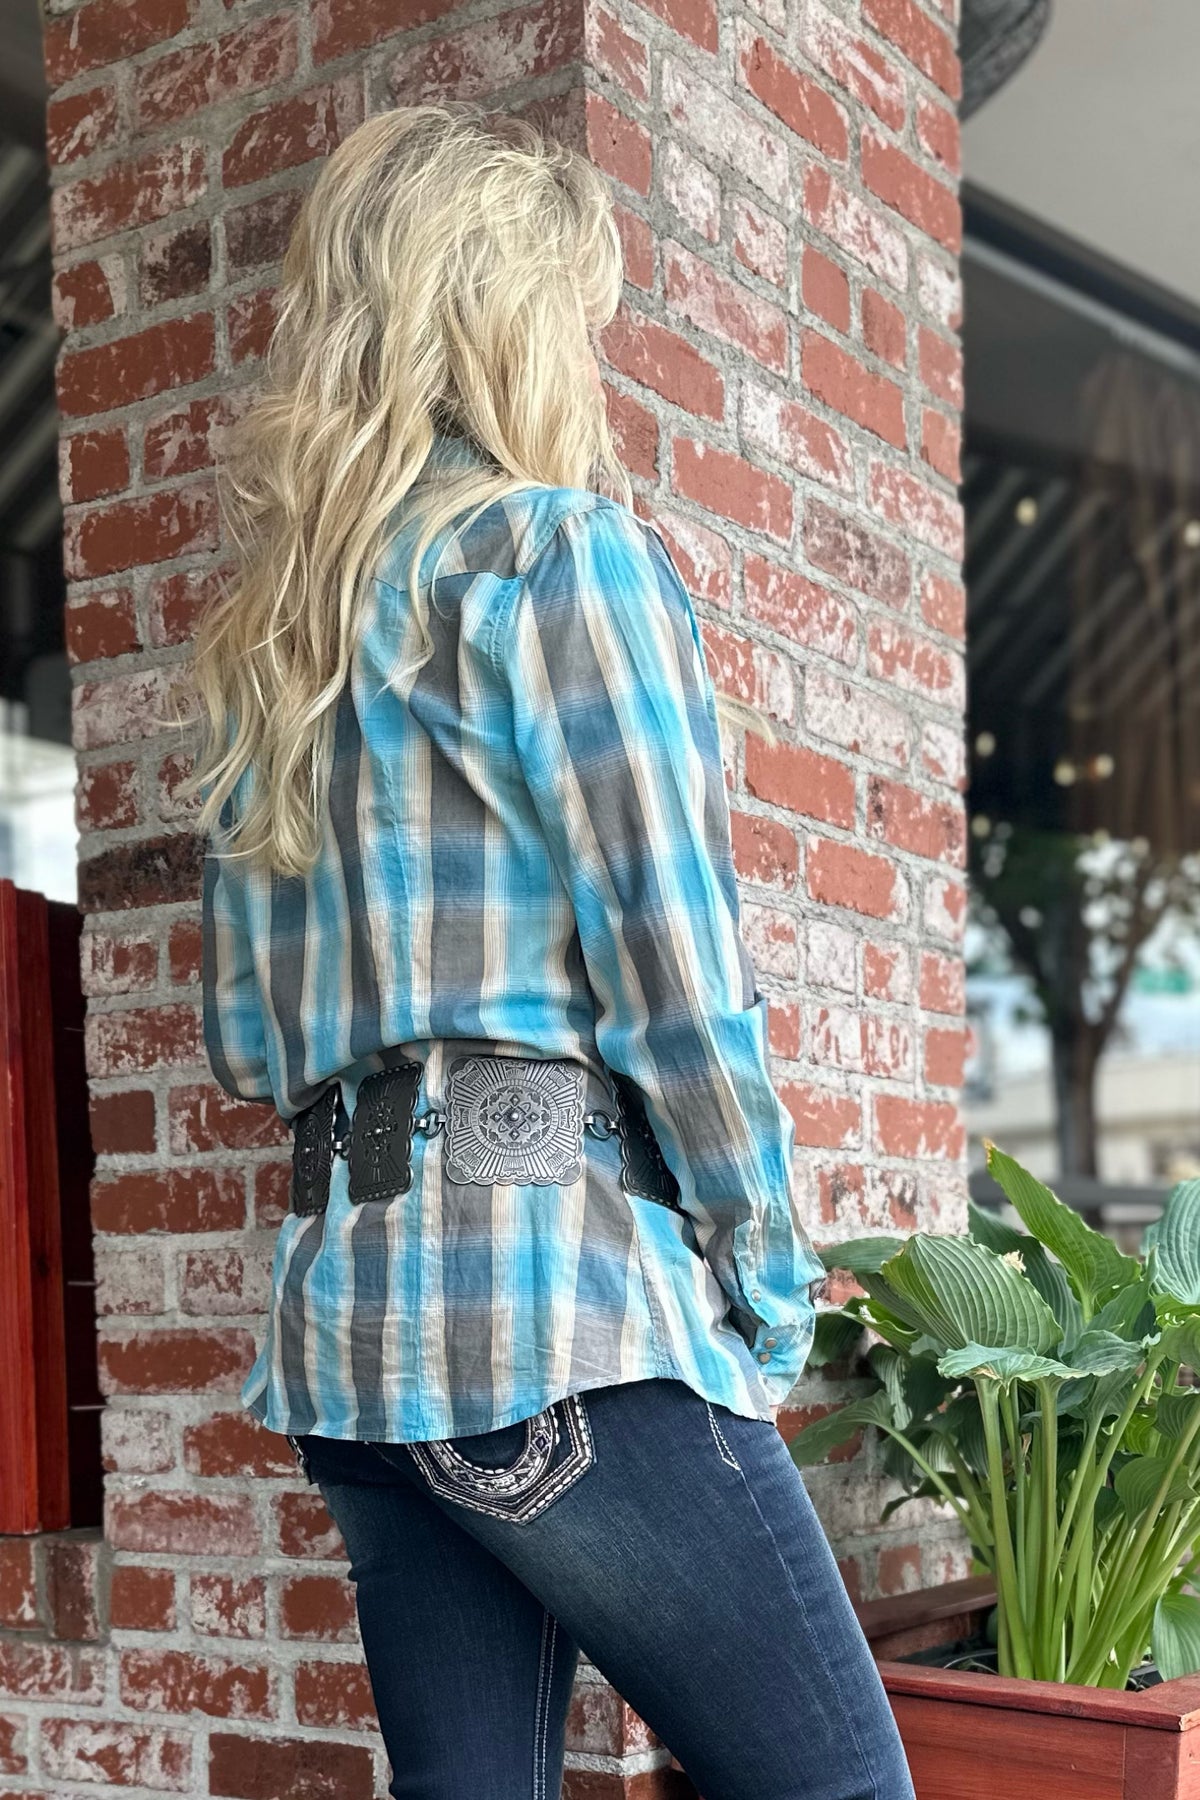 Ladies Roper Western Snap Shirt in Beach Dobby Plaid by Roper-Top-Roper/Stetson-Gallop 'n Glitz- Women's Western Wear Boutique, Located in Grants Pass, Oregon